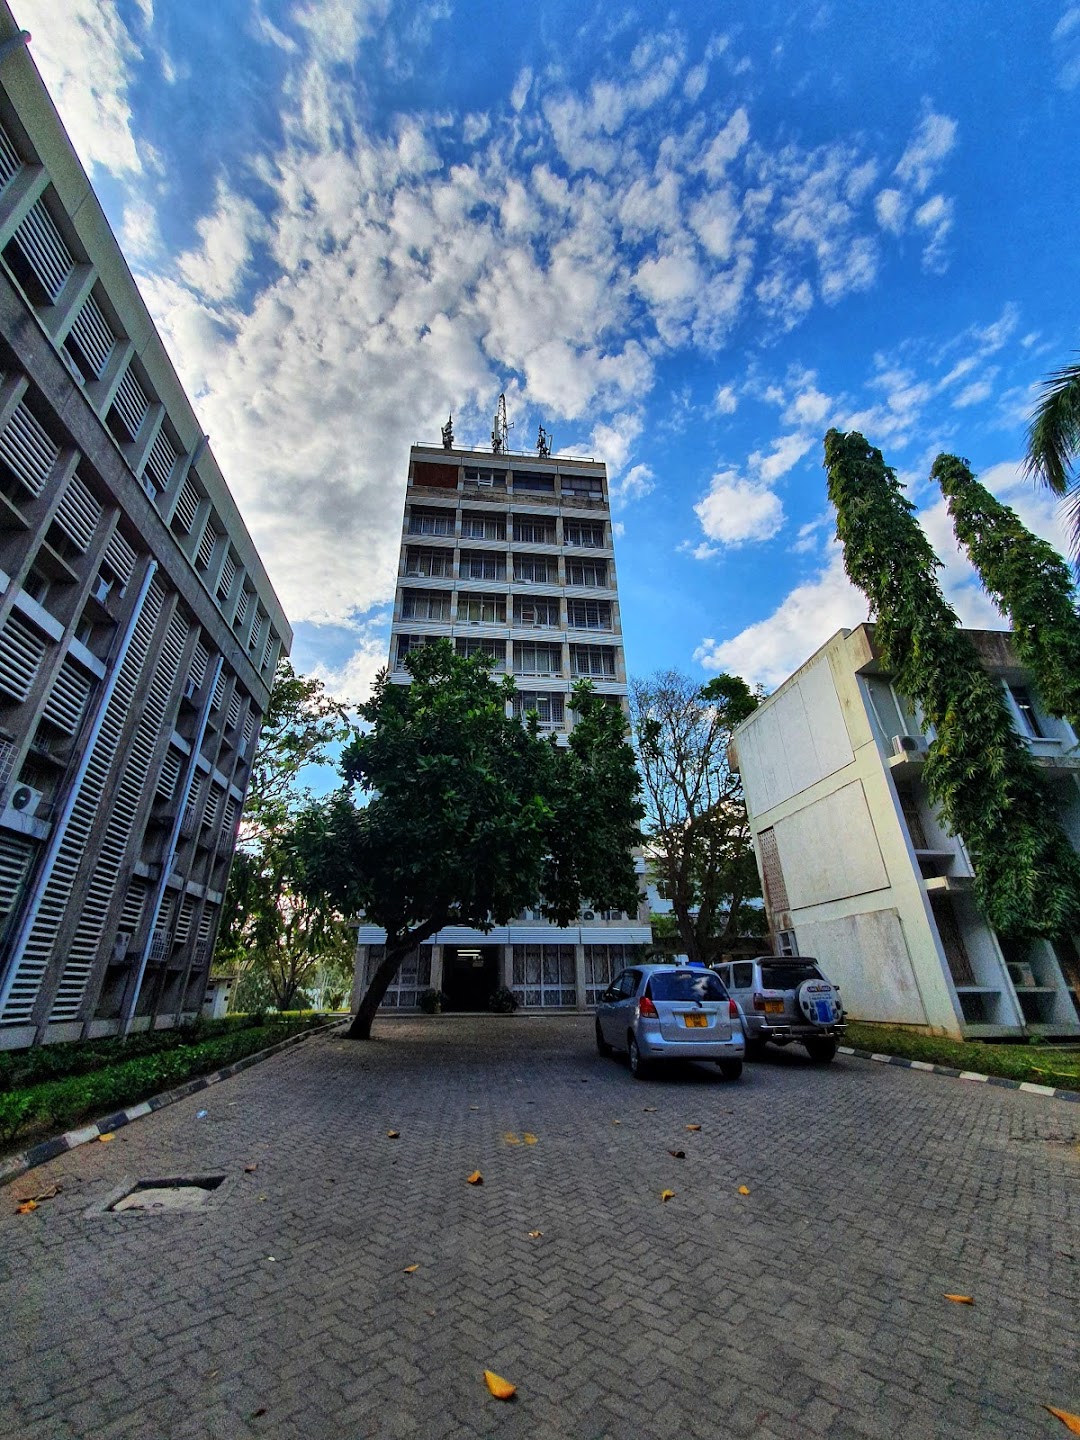 College of Arts and Social Sciences